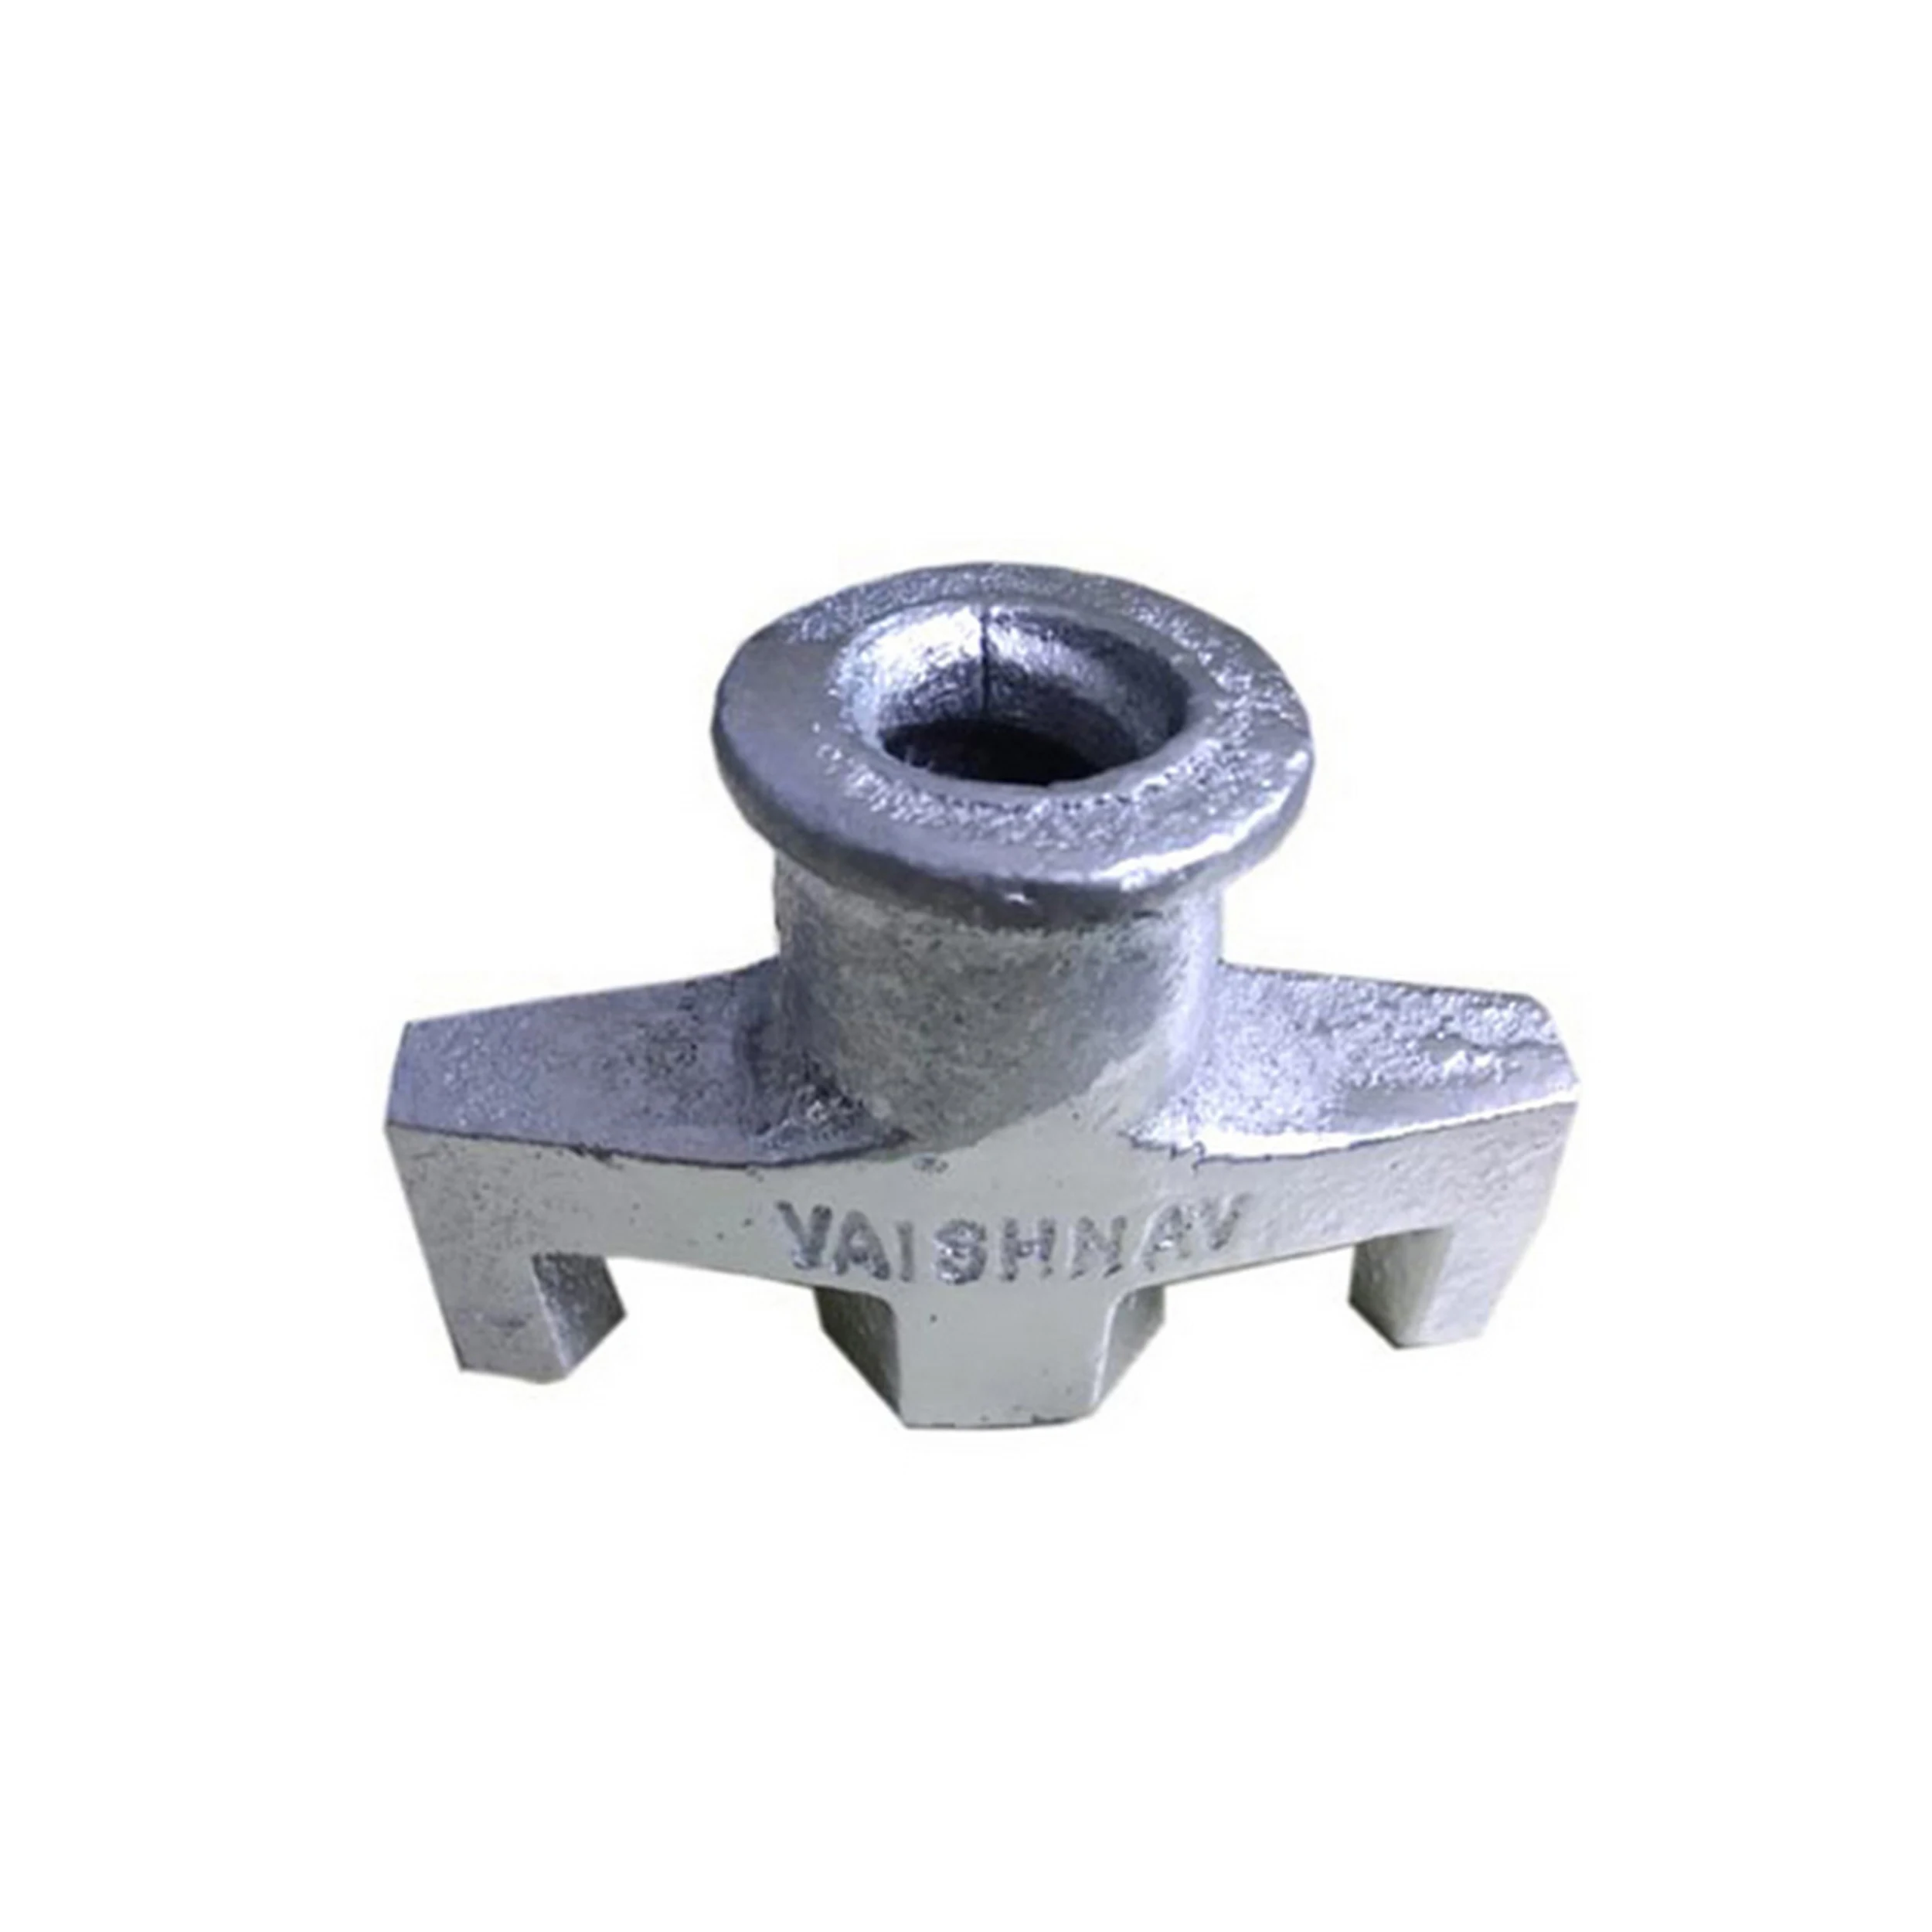 16mm Cast Iron Formwork Wing Nut for concrete shuttering formwork